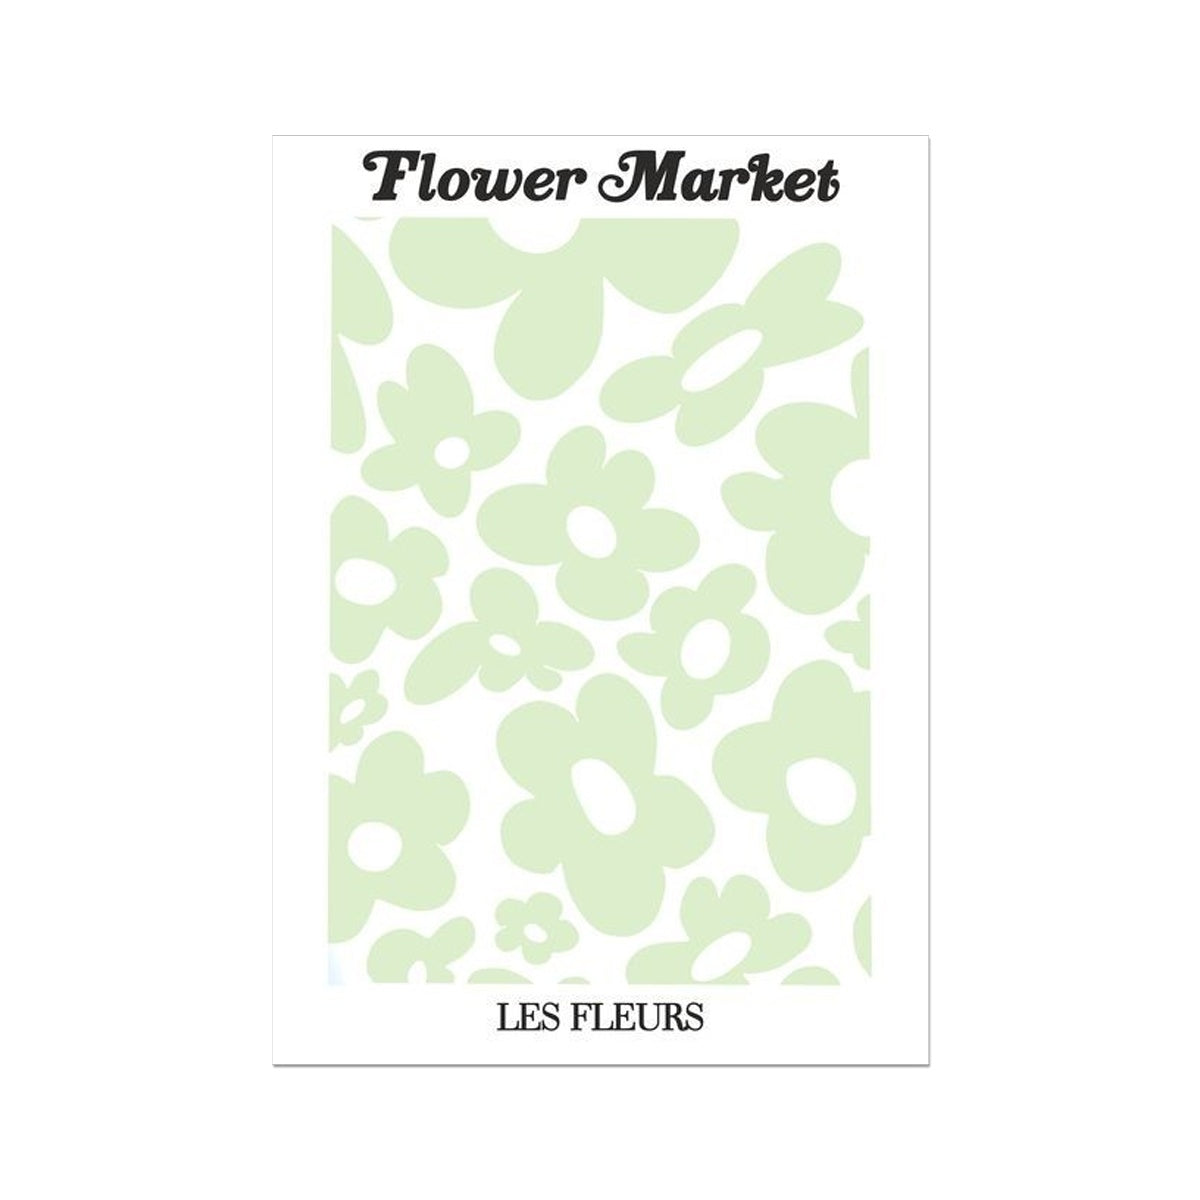 © les muses / Our Flower Market / Les Fleurs collection features wall art with a vibrant daisy design under original hand drawn typography. Danish pastel posters full of daisies to brighten up any gallery wall.